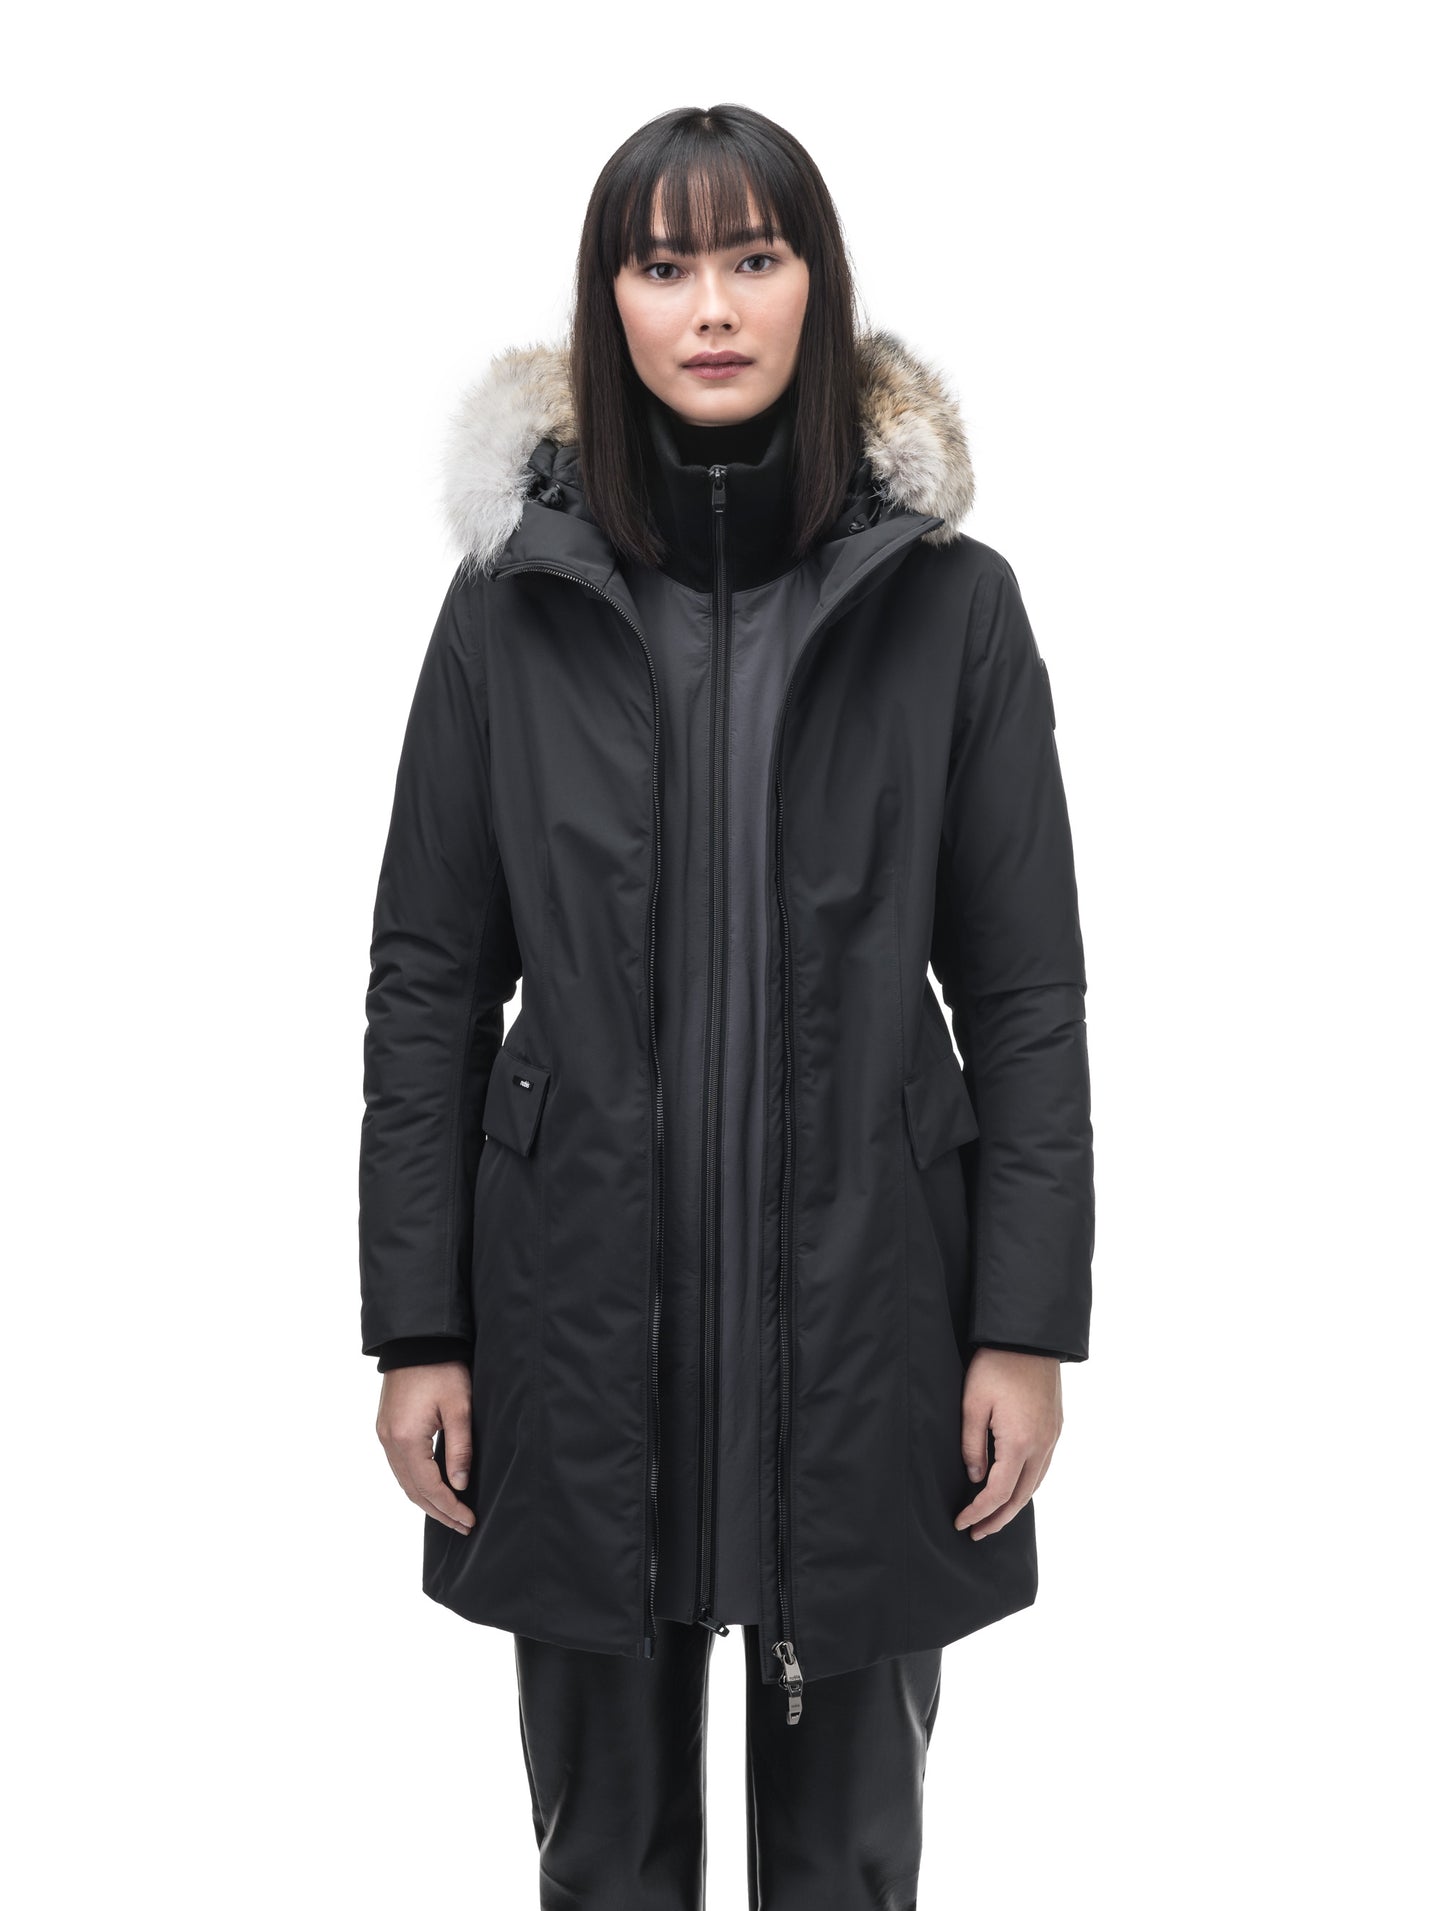 Romeda Ladies Mid Thigh Parka in thigh length, Canadian duck down insulation, non-removable hood with removable fur ruff trim, and two-way front zipper, in Black